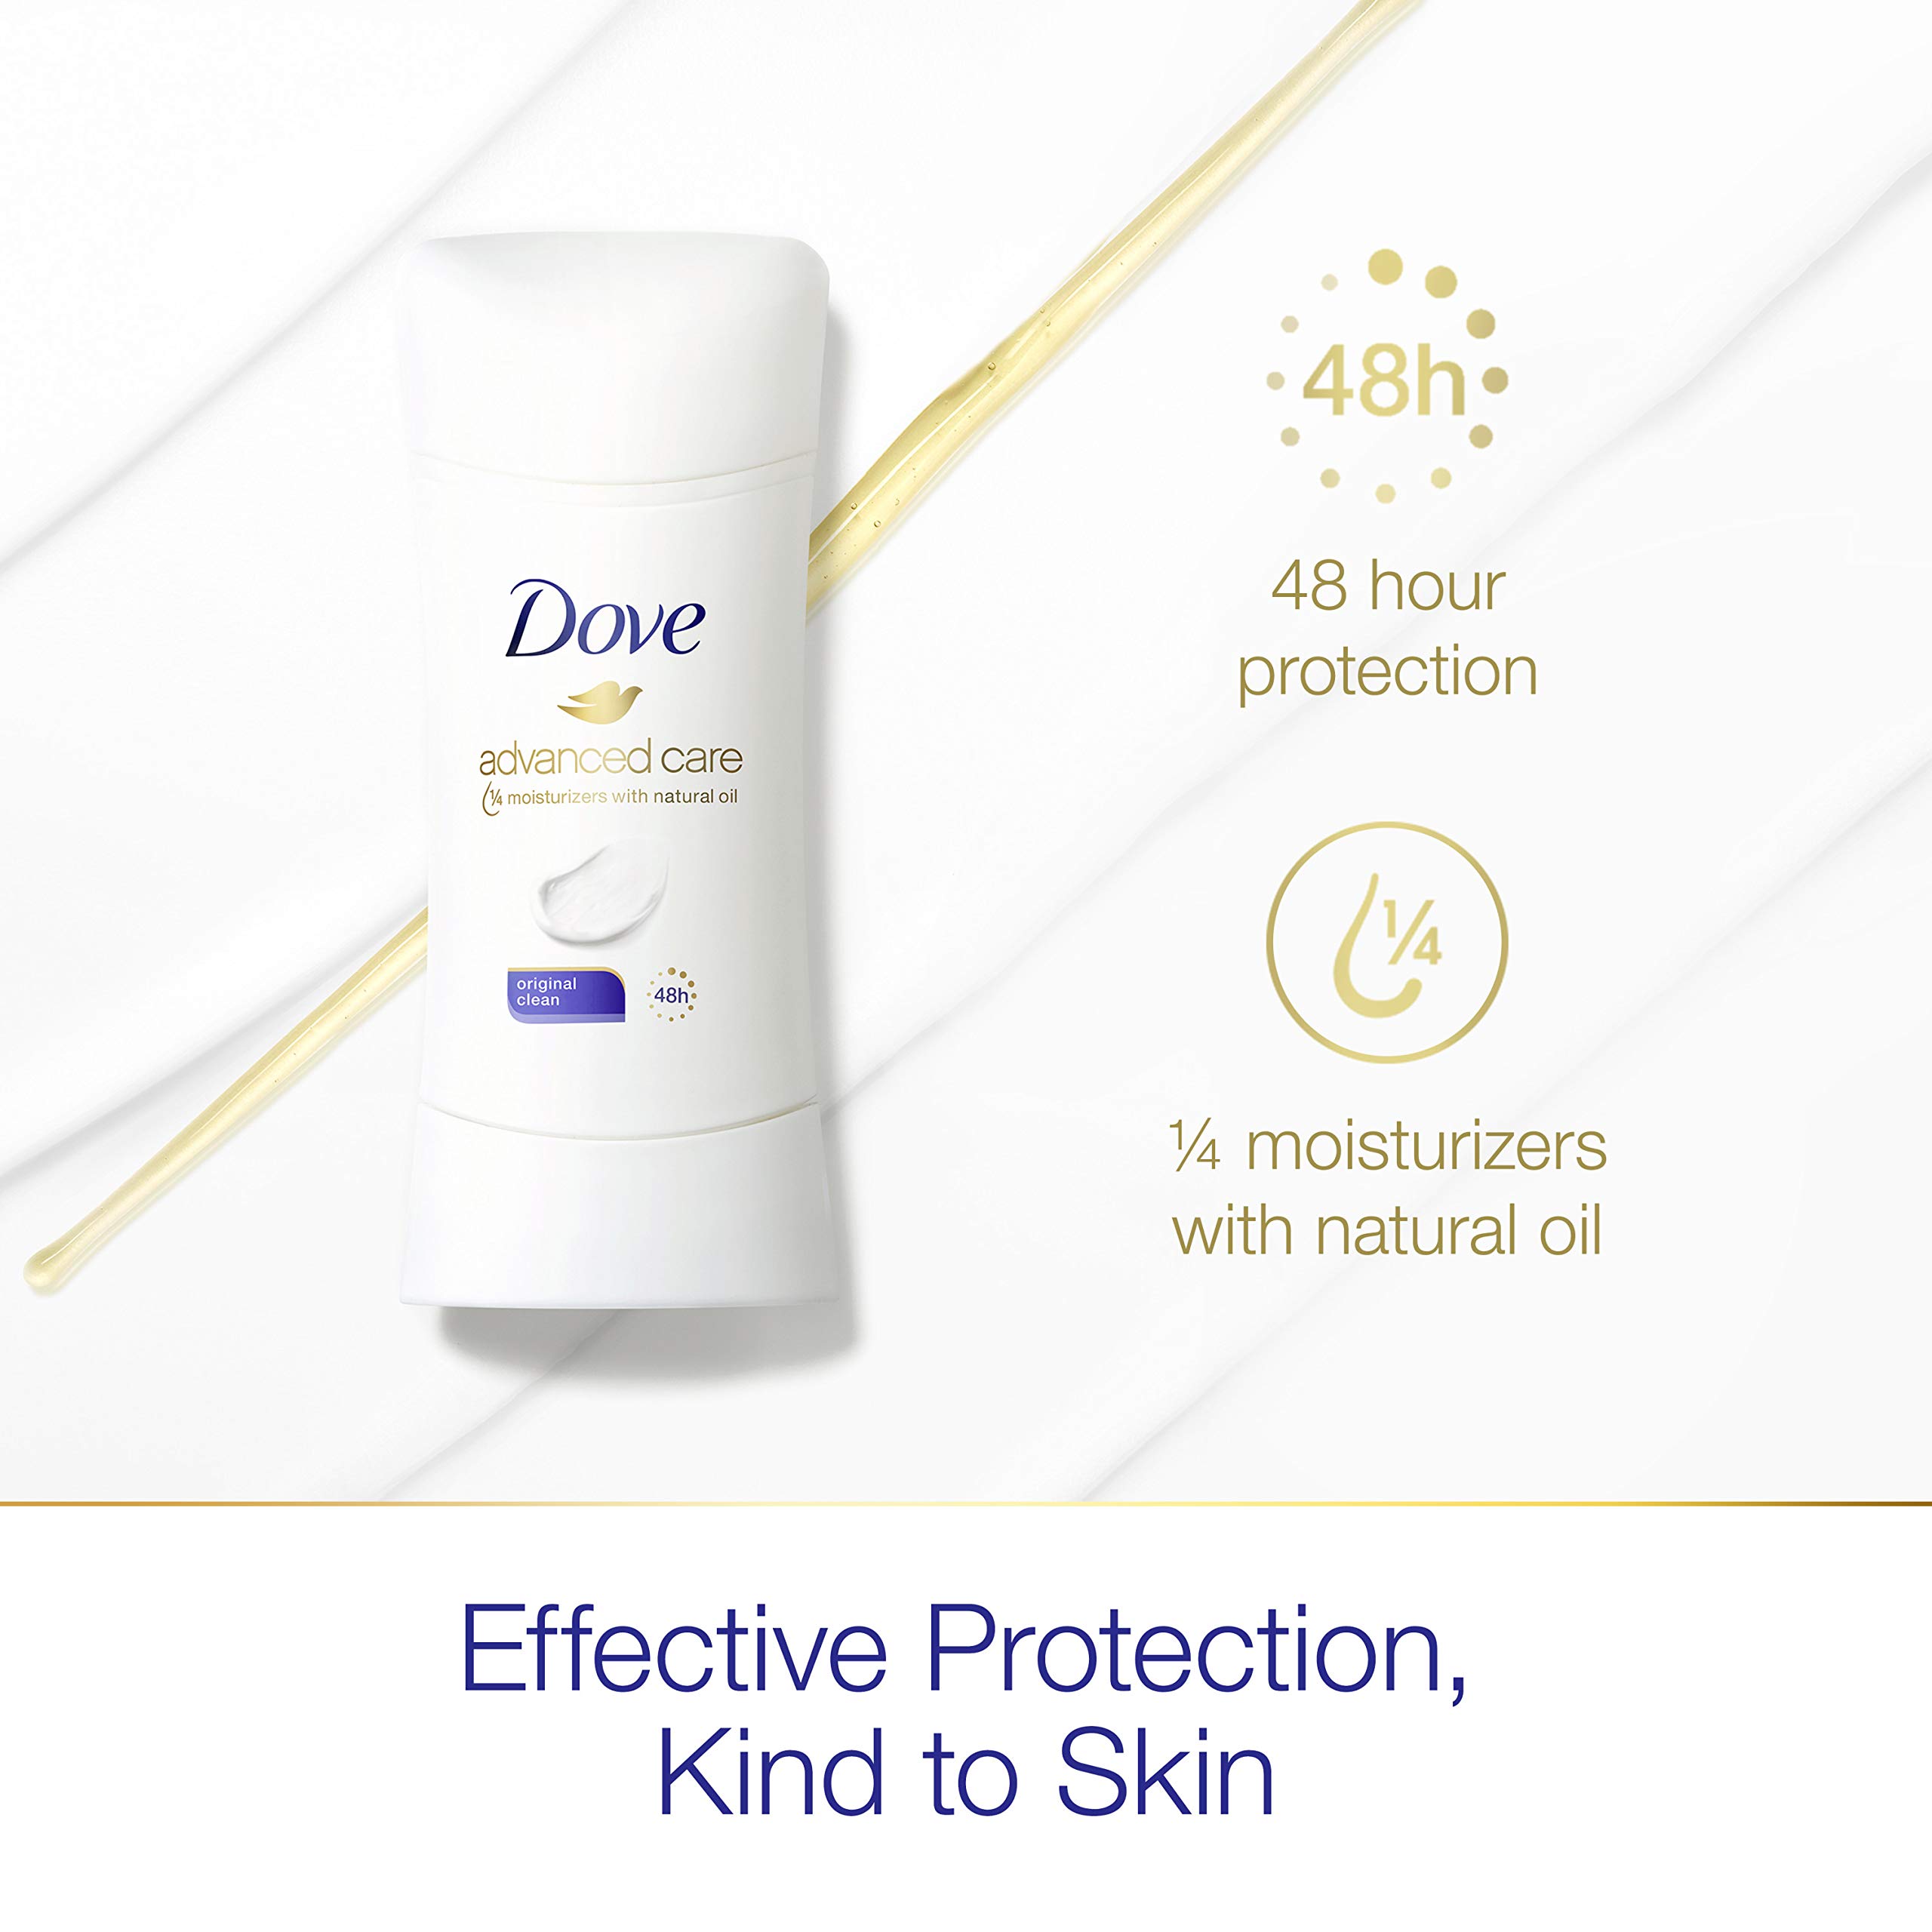 Dove Advanced Care Antiperspirant Deodorant Stick for Women, Original Clean, for 48 Hour Protection And Soft And Comfortable Underarms, 2.6 oz